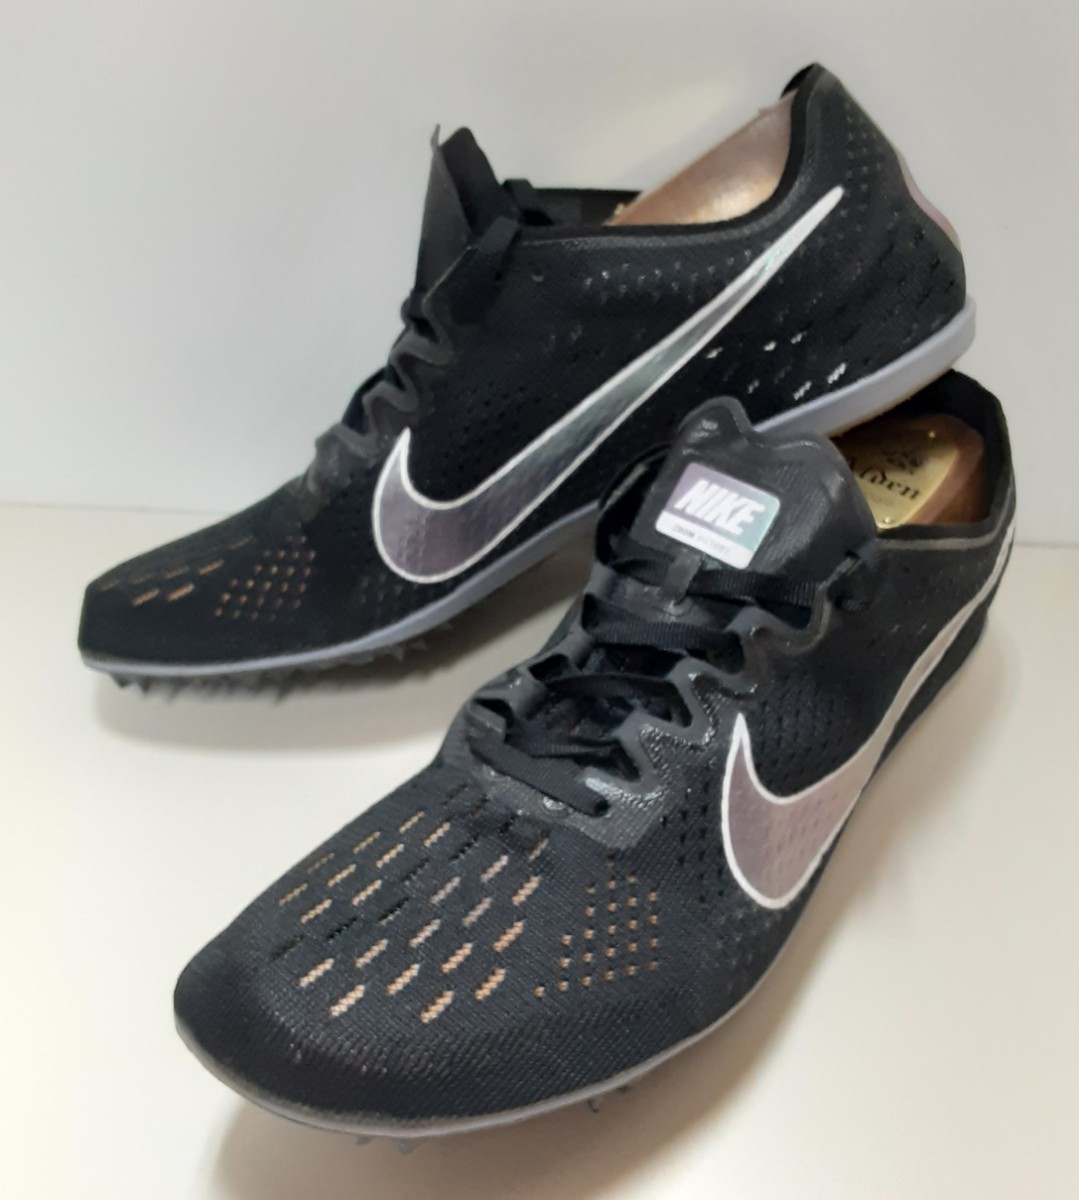  most price! superior article! regular price 17600 jpy! masterpiece 19 year made! high-end land spike! Nike zoom Victory 3 light weight shoes! middle distance * long distance for! black! black 28cm